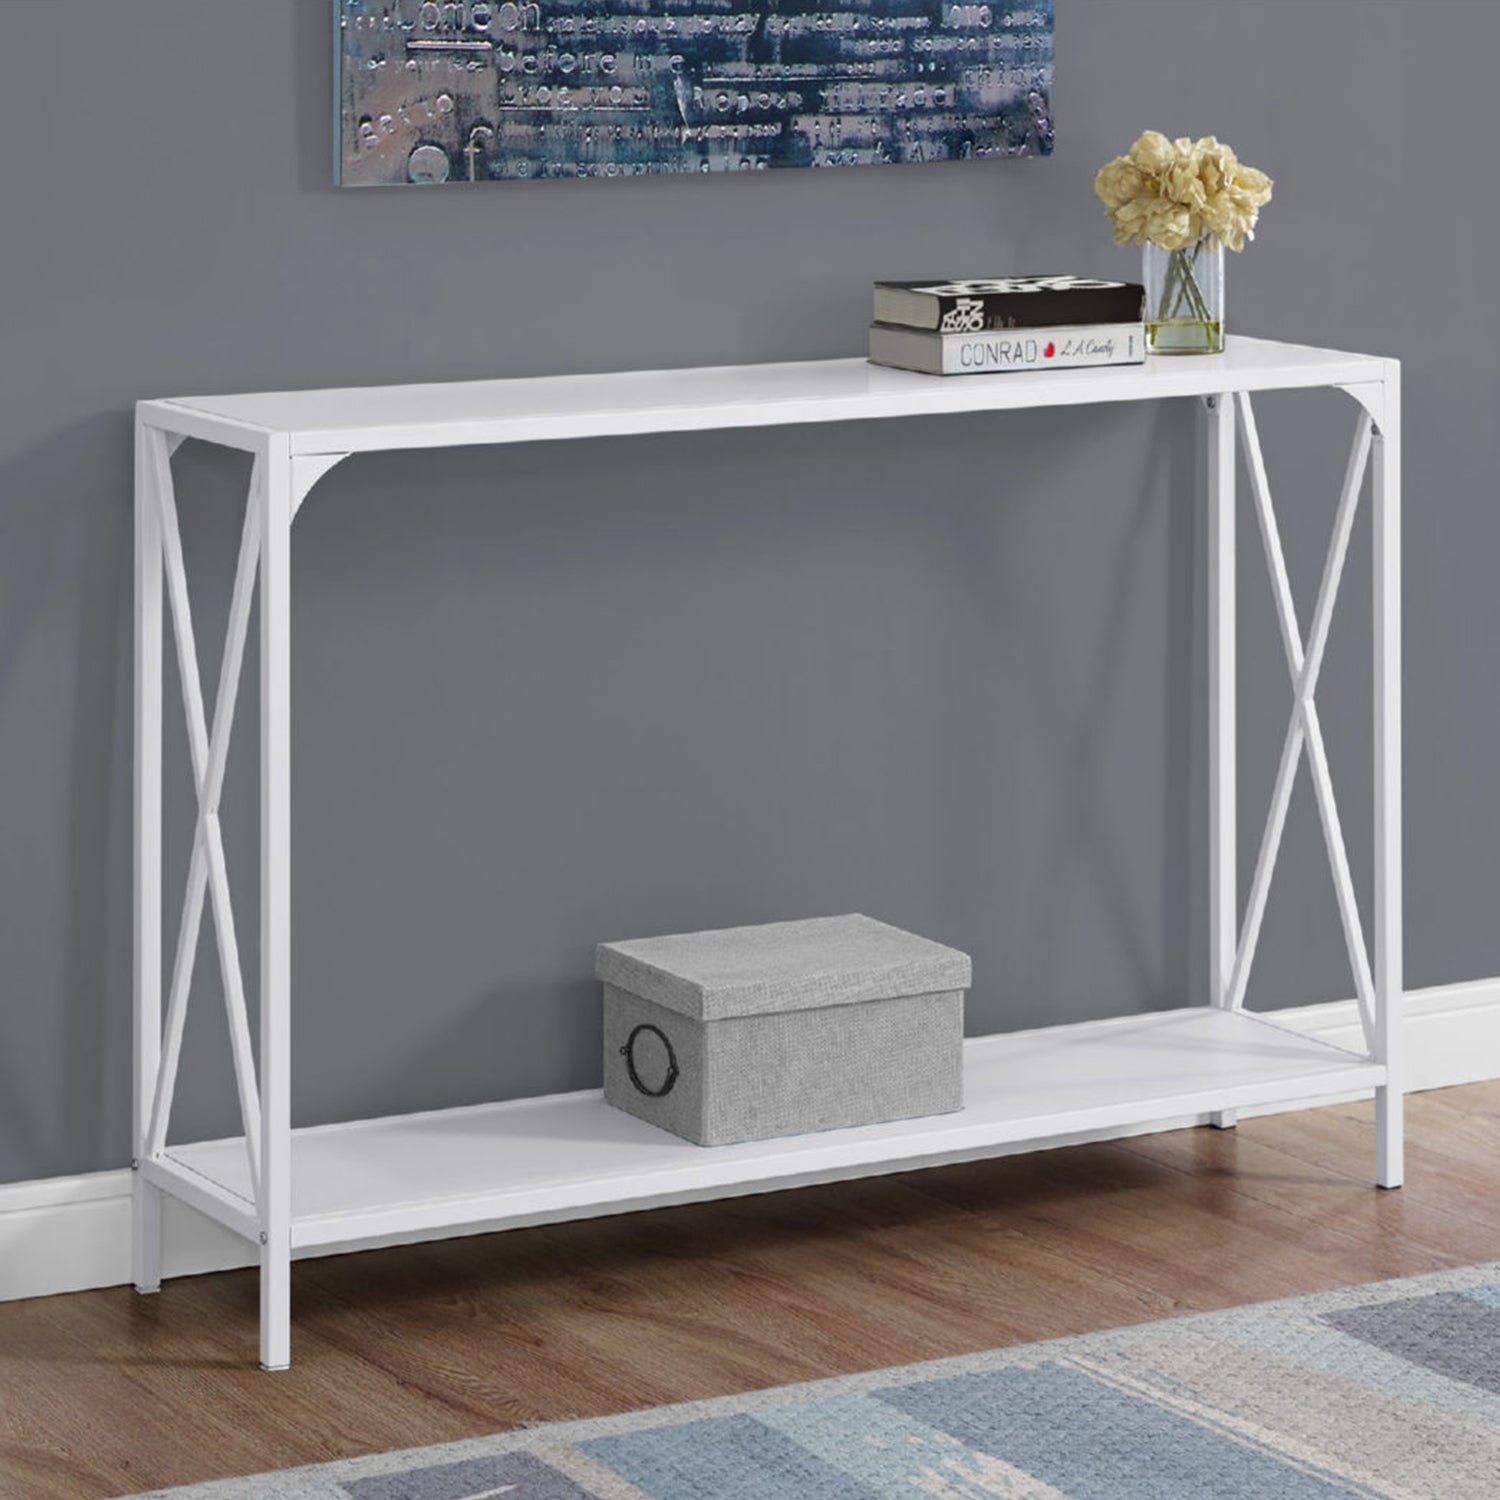 48" White Console Table With Storage